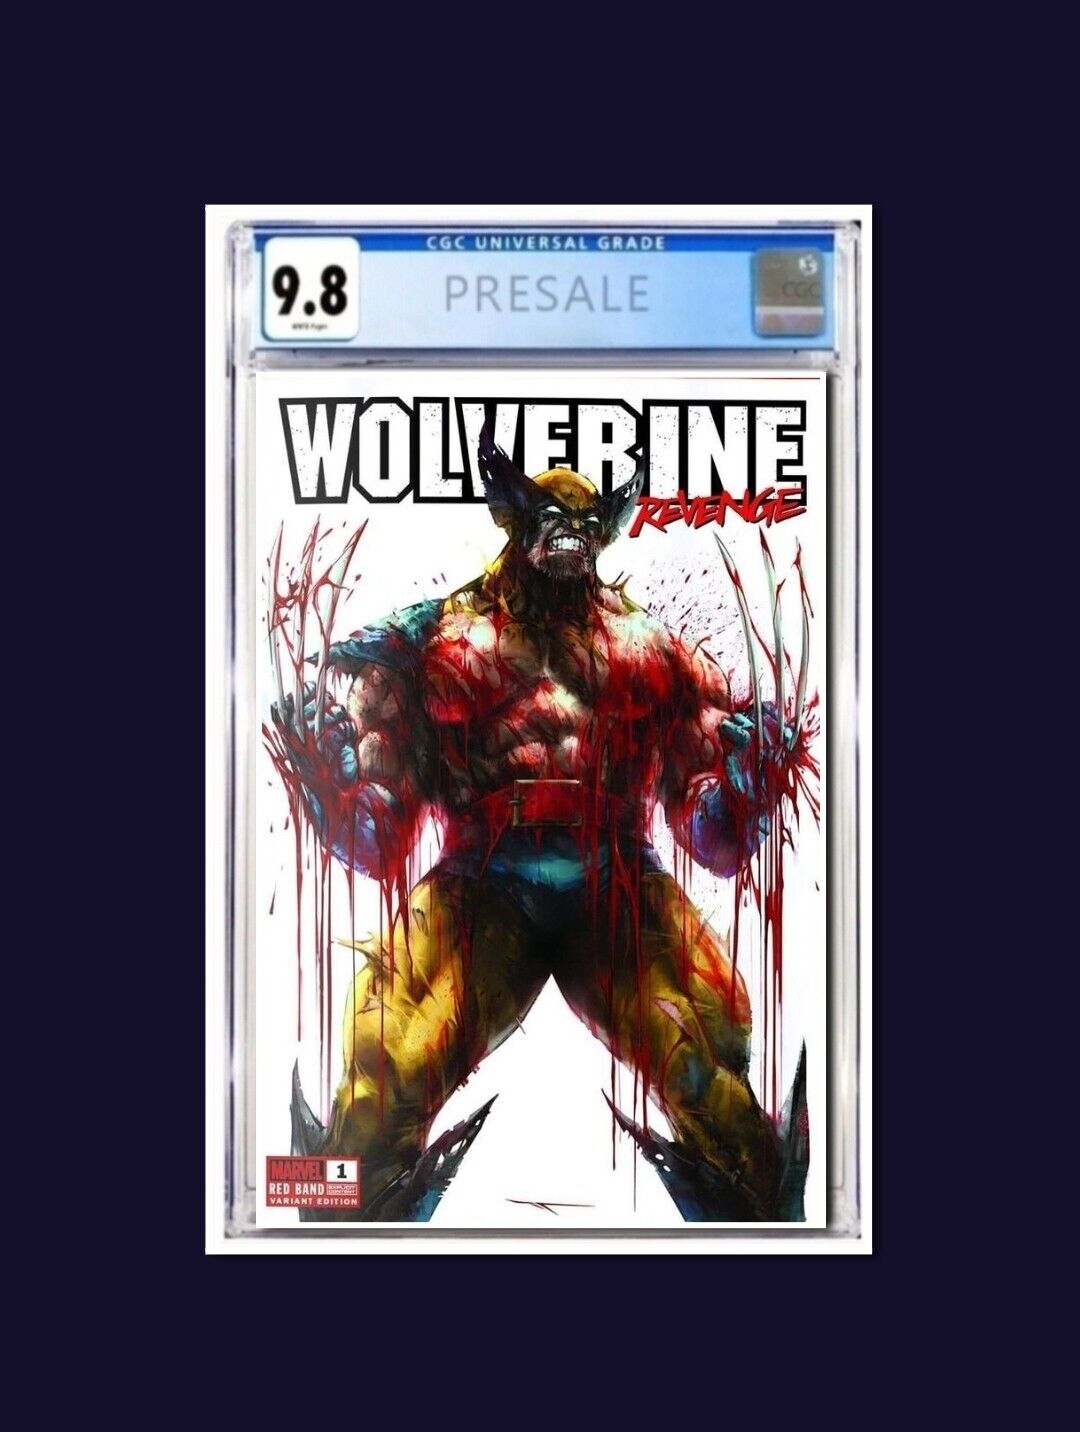 Wolverine Revenge: Red Band #1 CGC 9.8 PREORDER Ivan Tao Edition Limited 999 🔥 